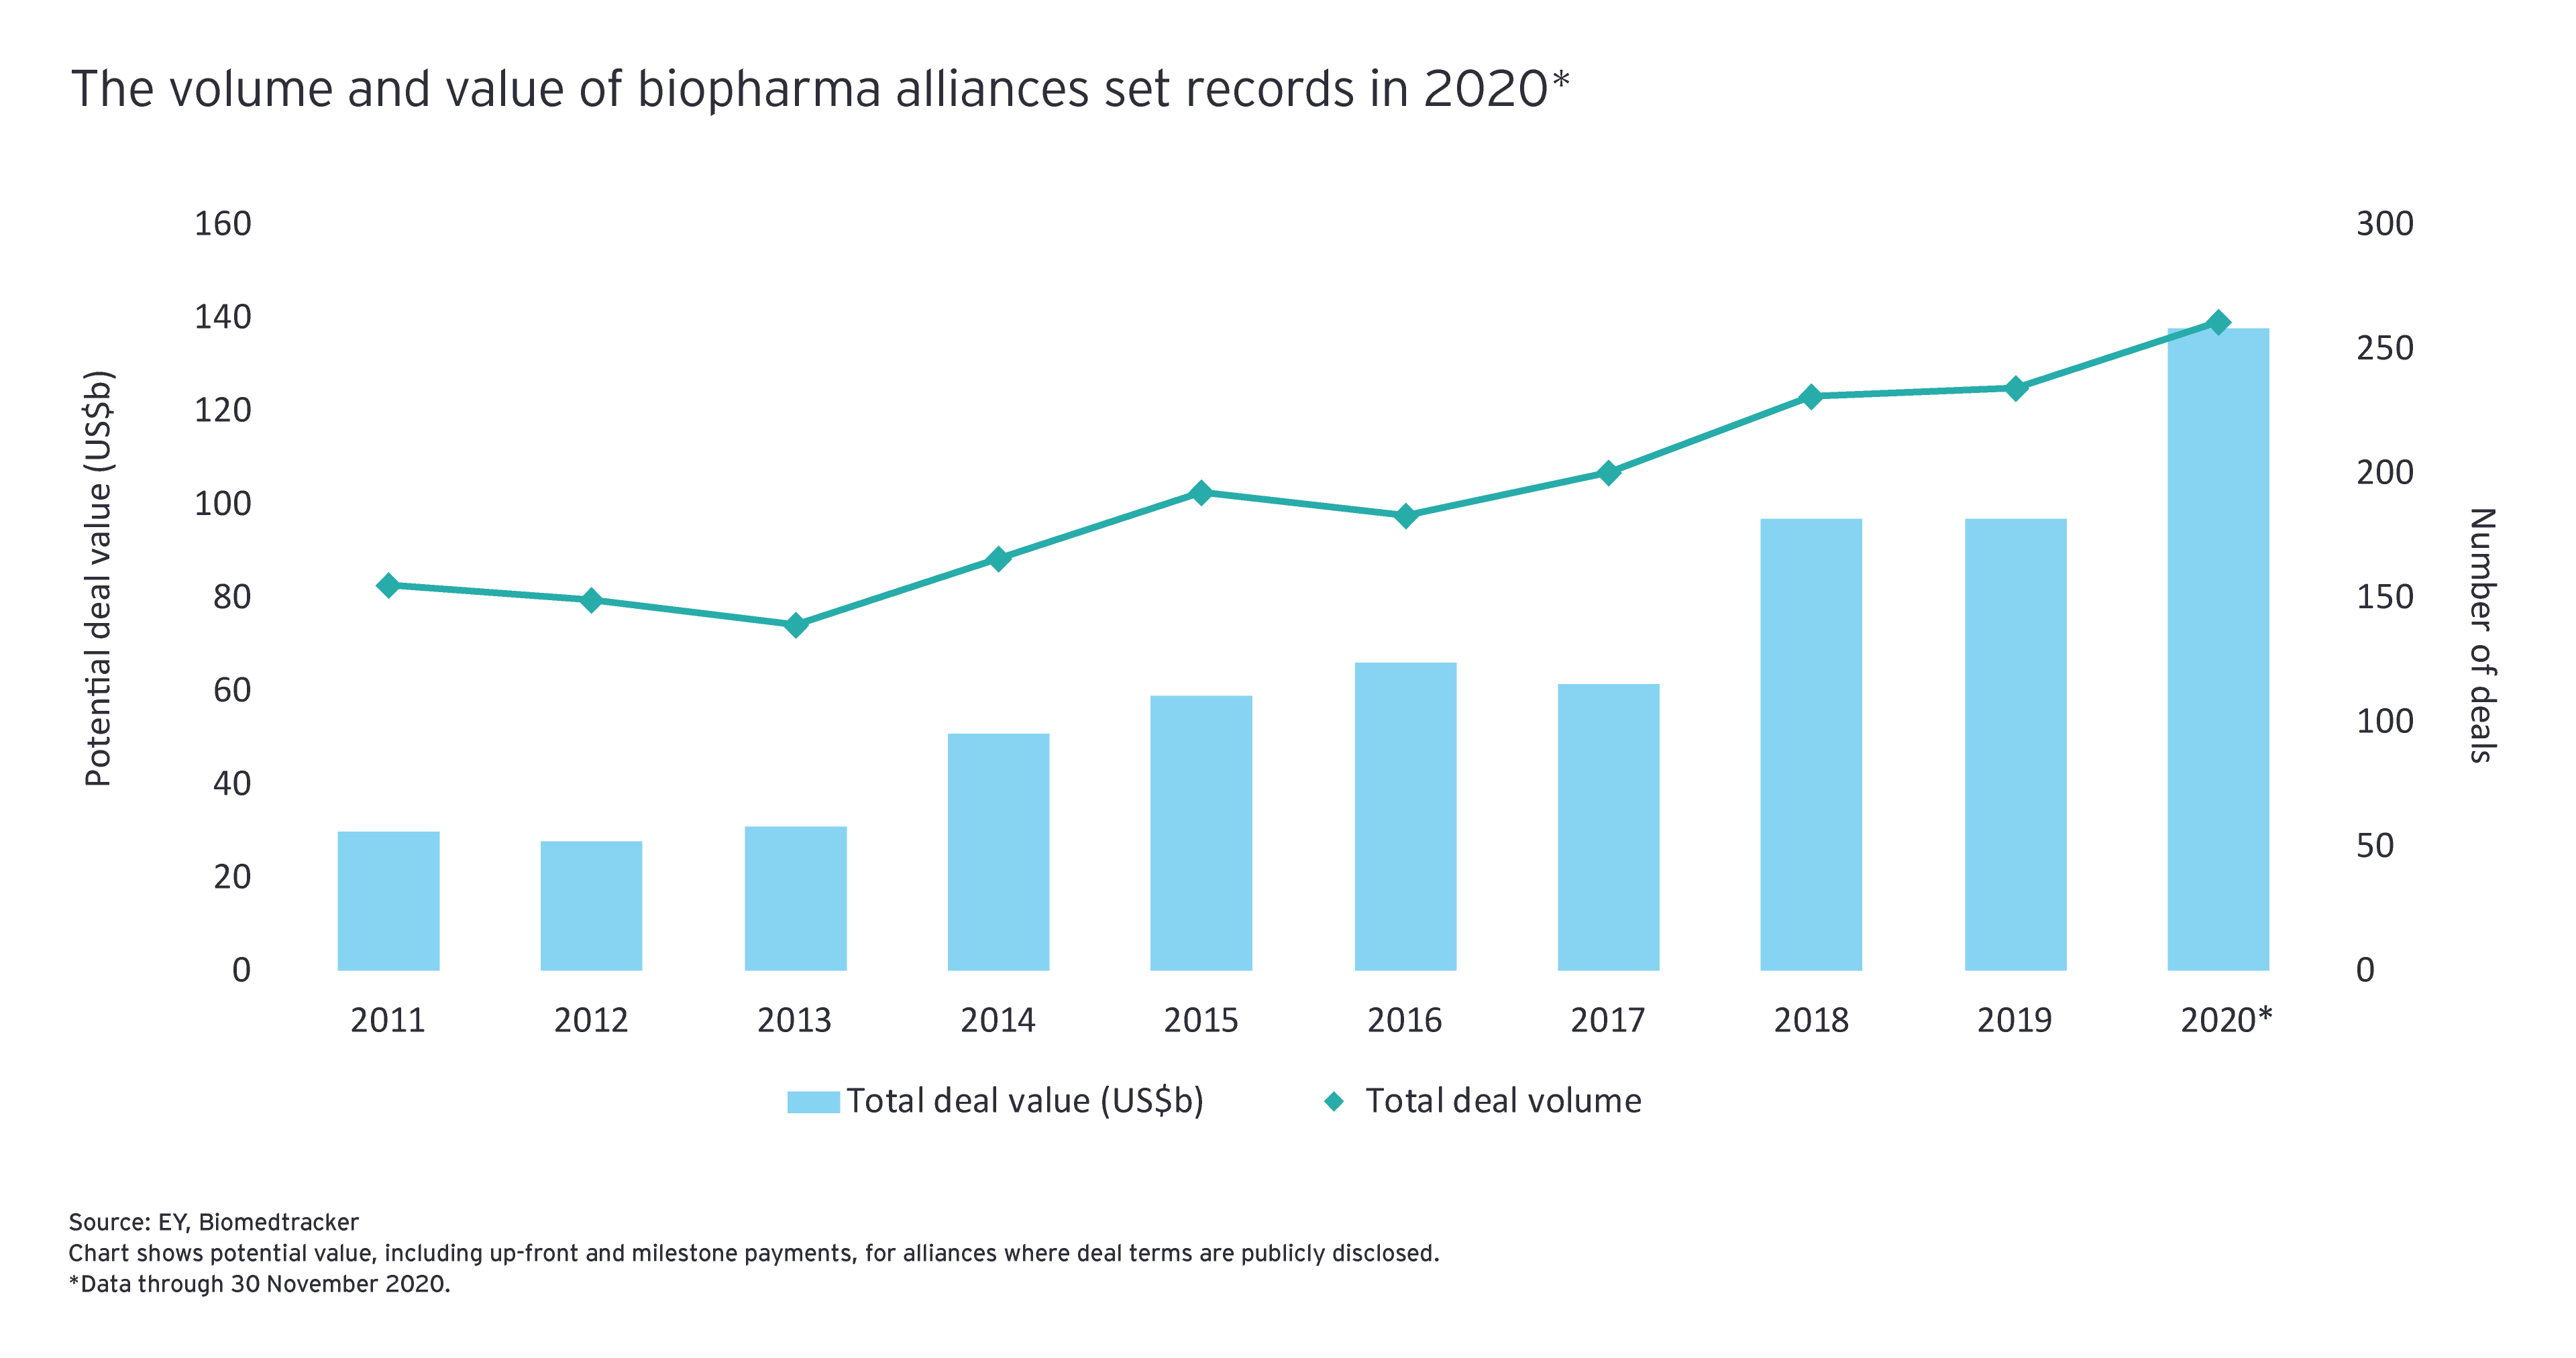 Firepower the volume and value of biopharma alliances set records in 2020